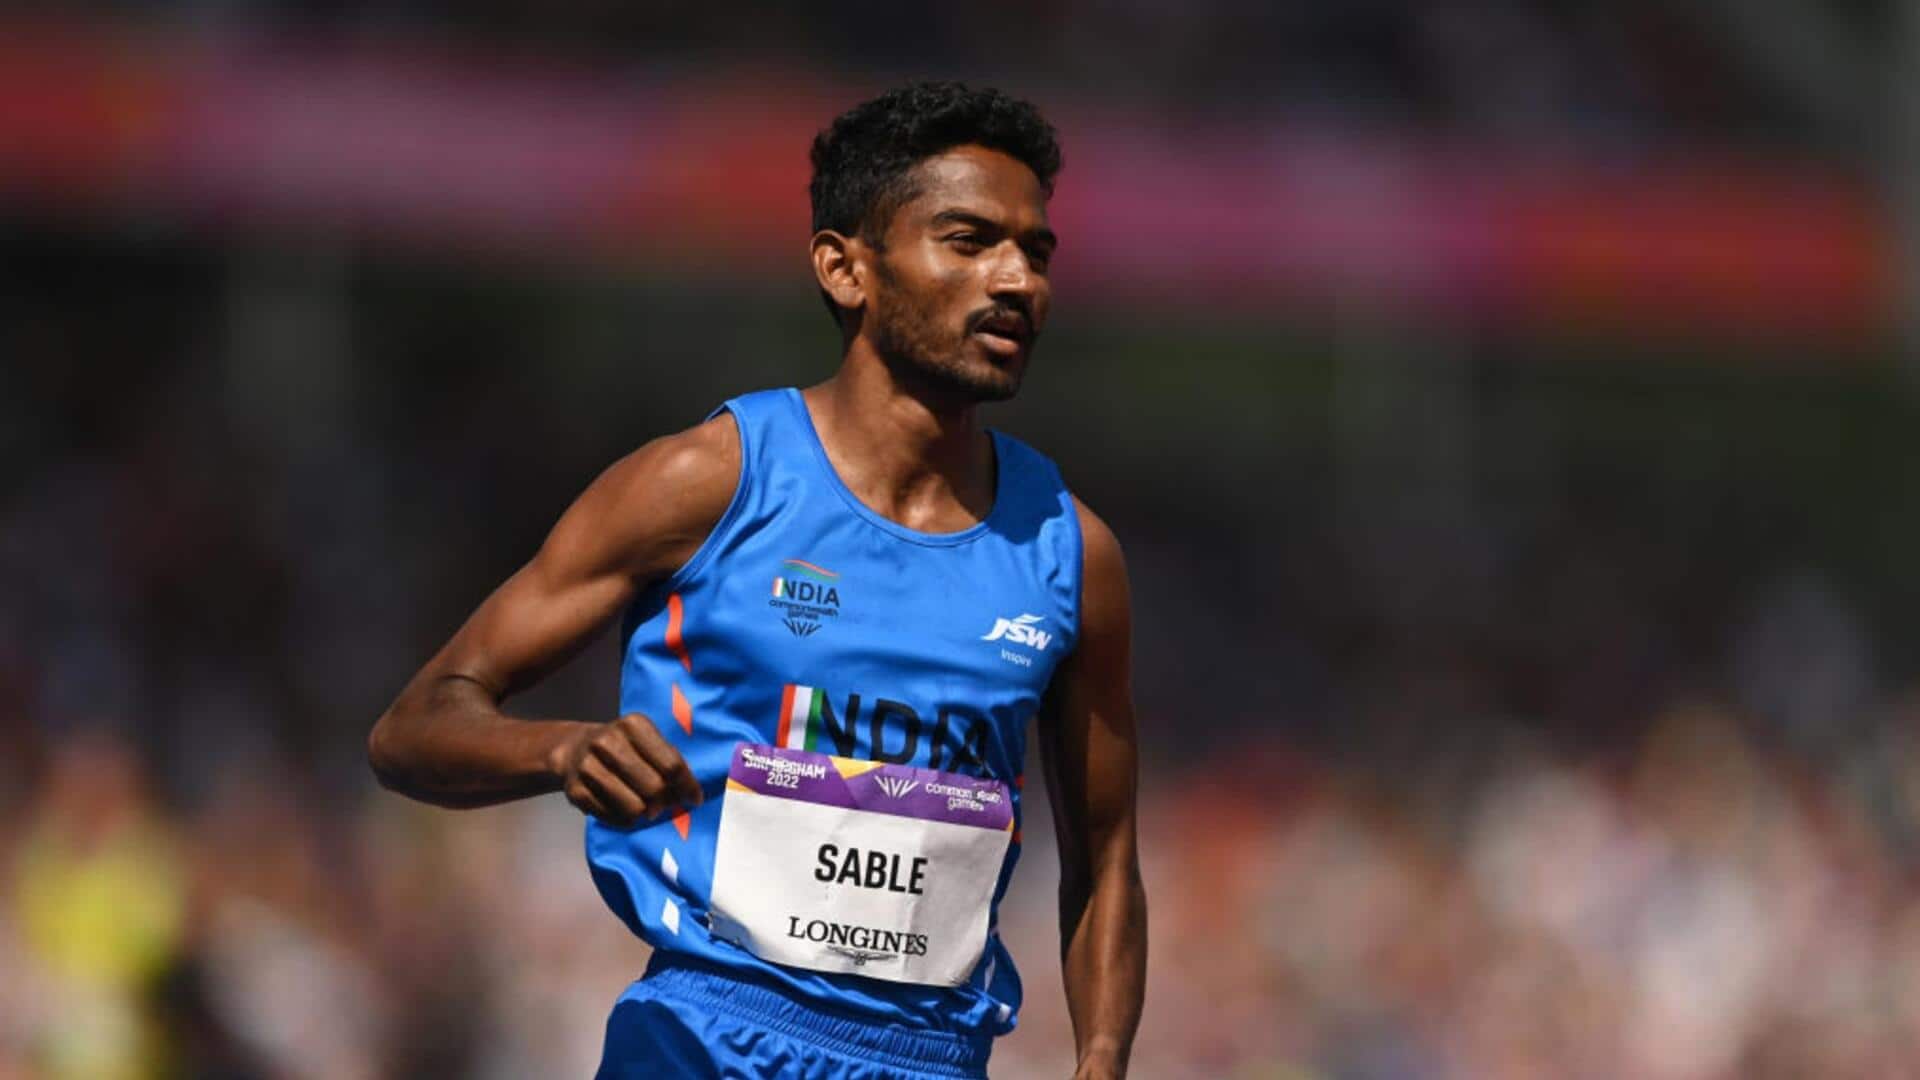 Who is India's steeplechaser and long-distance runner Avinash Sable?